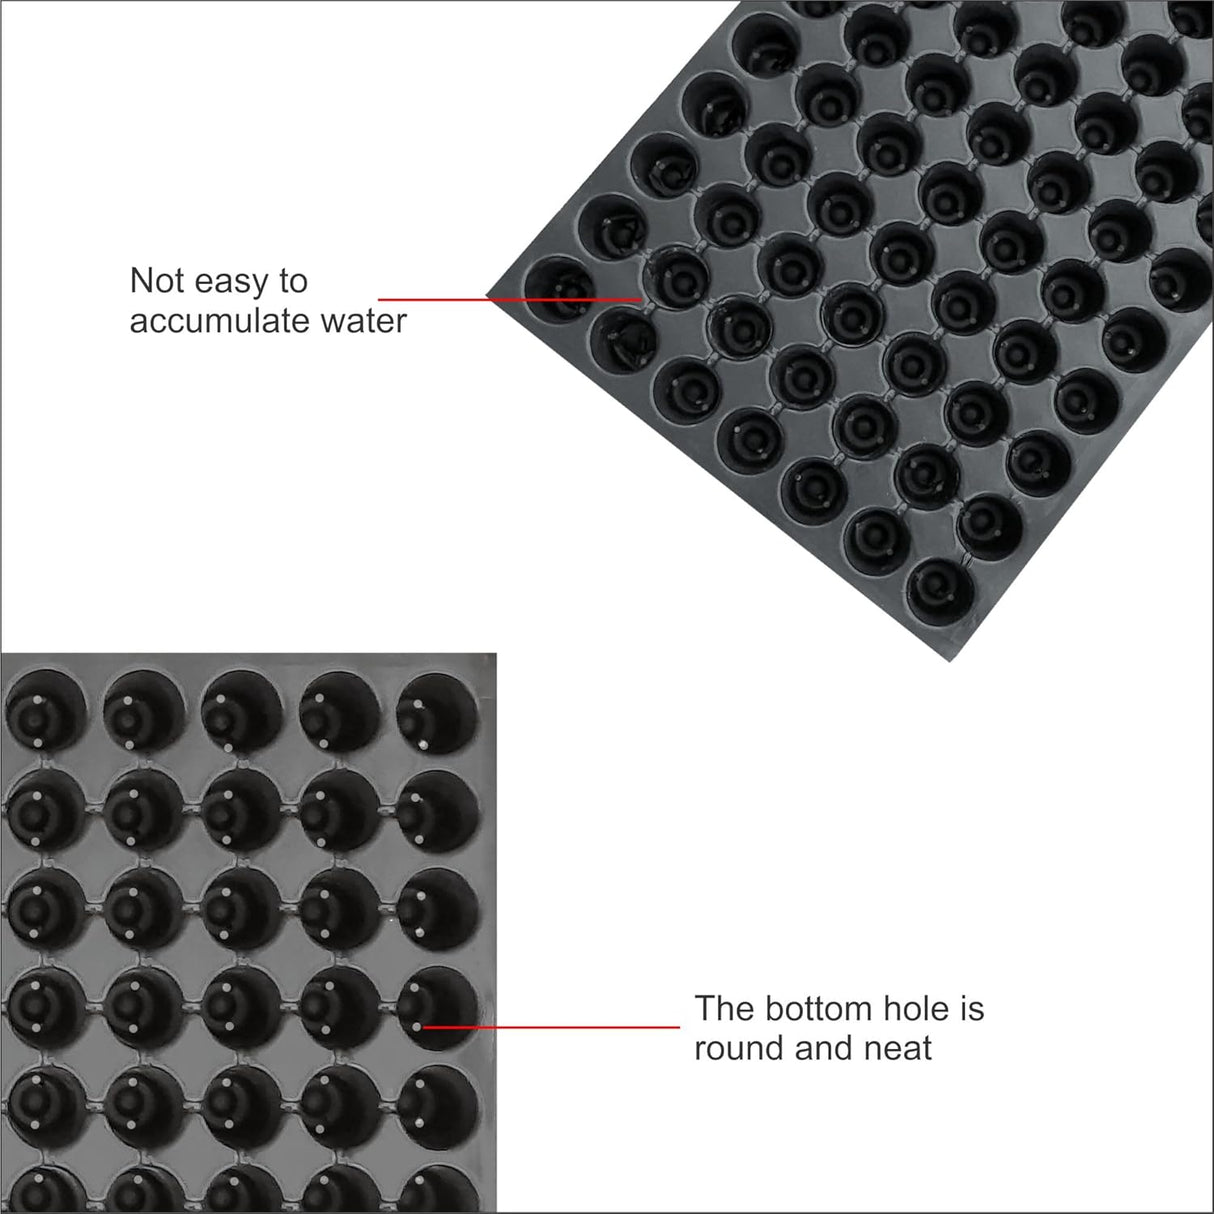 SINGHAL Seedling Tray - Pack of 15 (Black, 98 Holes) Germination Trays for Seedling, Nursery Trays for Plants, Reusable Plastic Trays for Garden Plantation, 98 Cavities Tray for Seeding